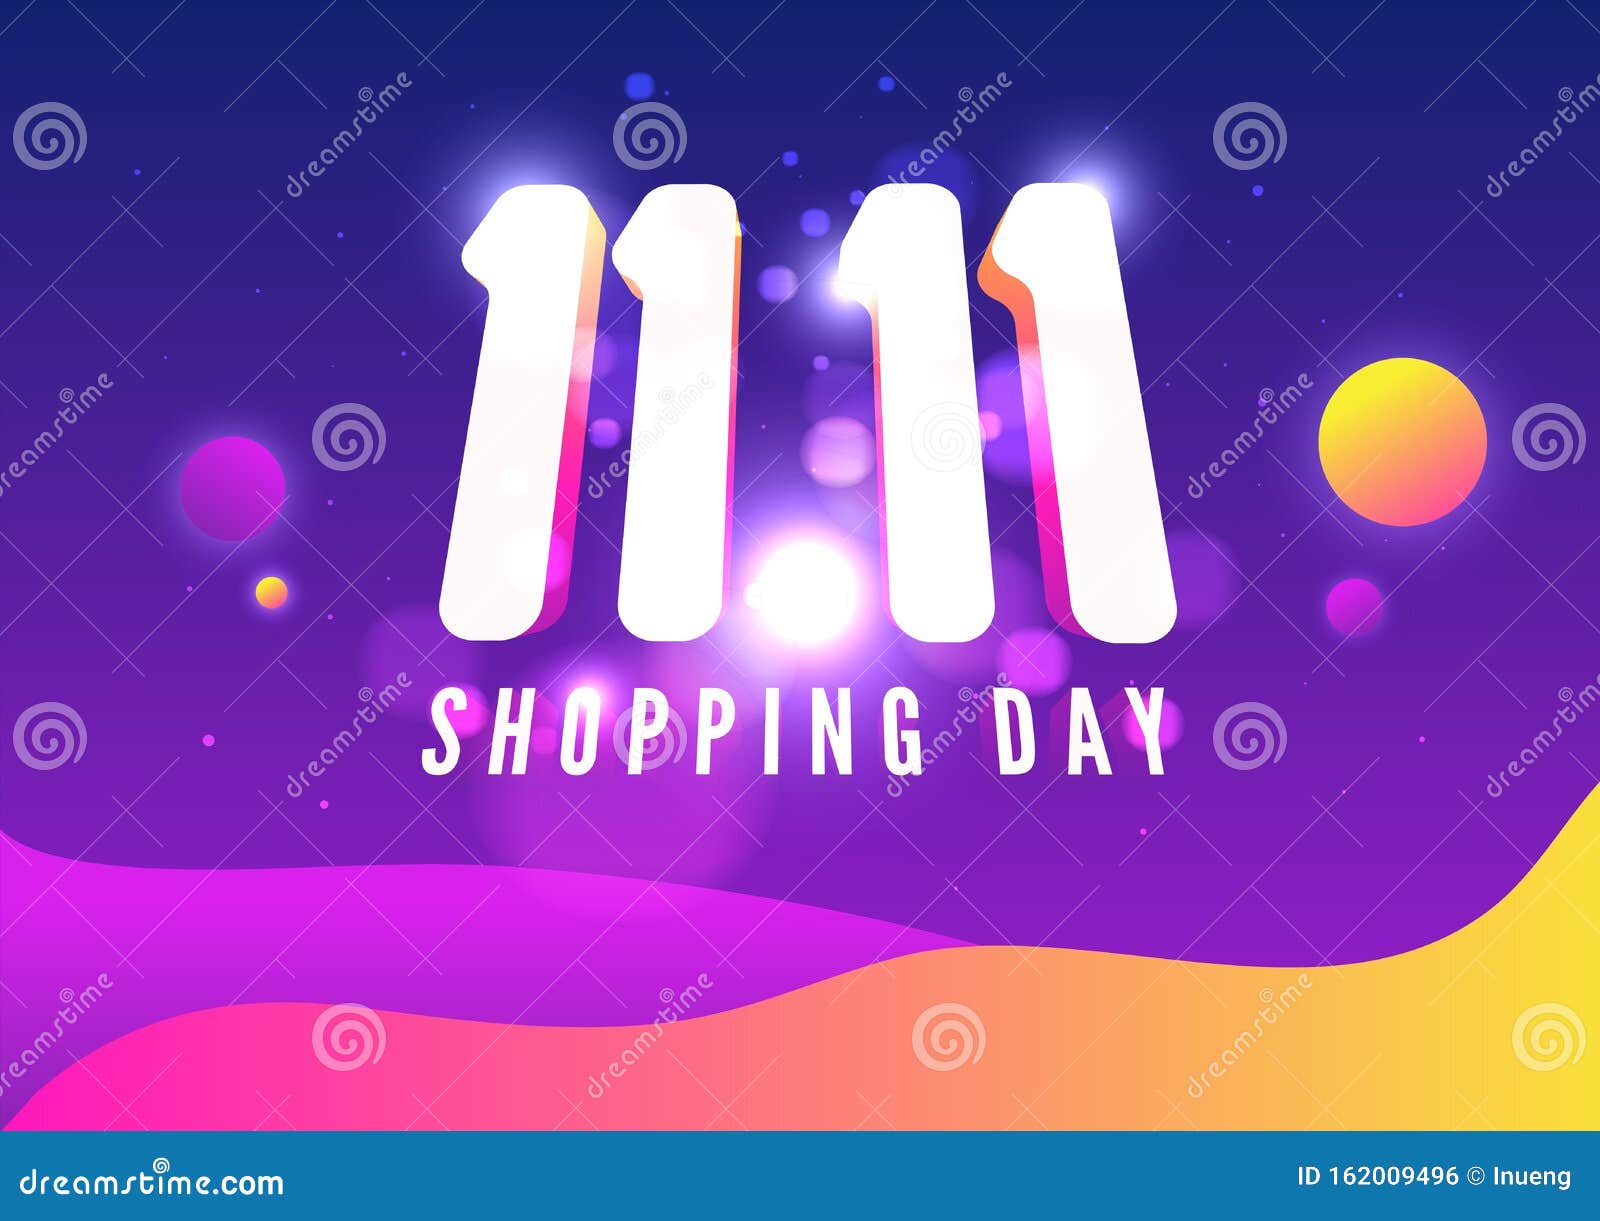 11.11 online shopping sale poster or flyer . singles day sale banner. global shopping world day.